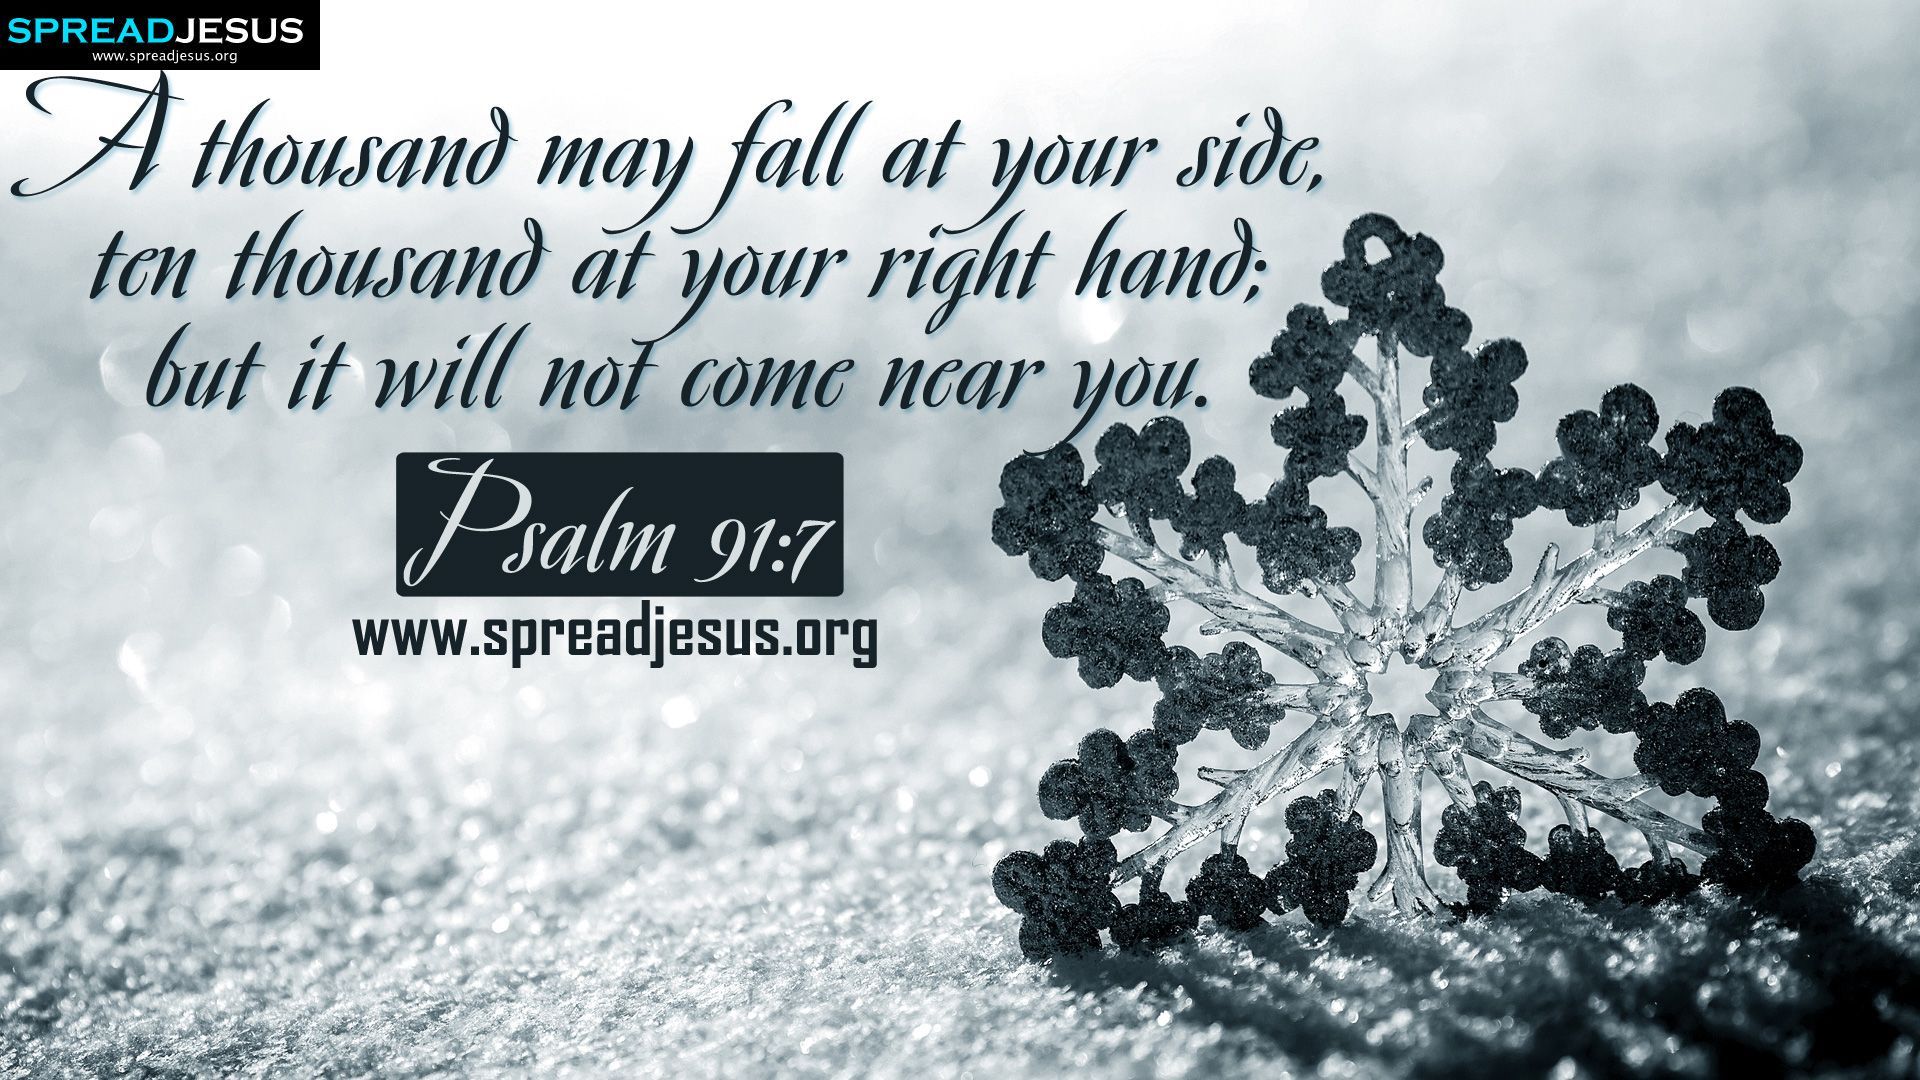 Psalm 91:7 BIBLE QUOTES HD WALLPAPERS FREE DOWNLOAD. Bible Quotes Hd, Bible Quotes, Psalm 91